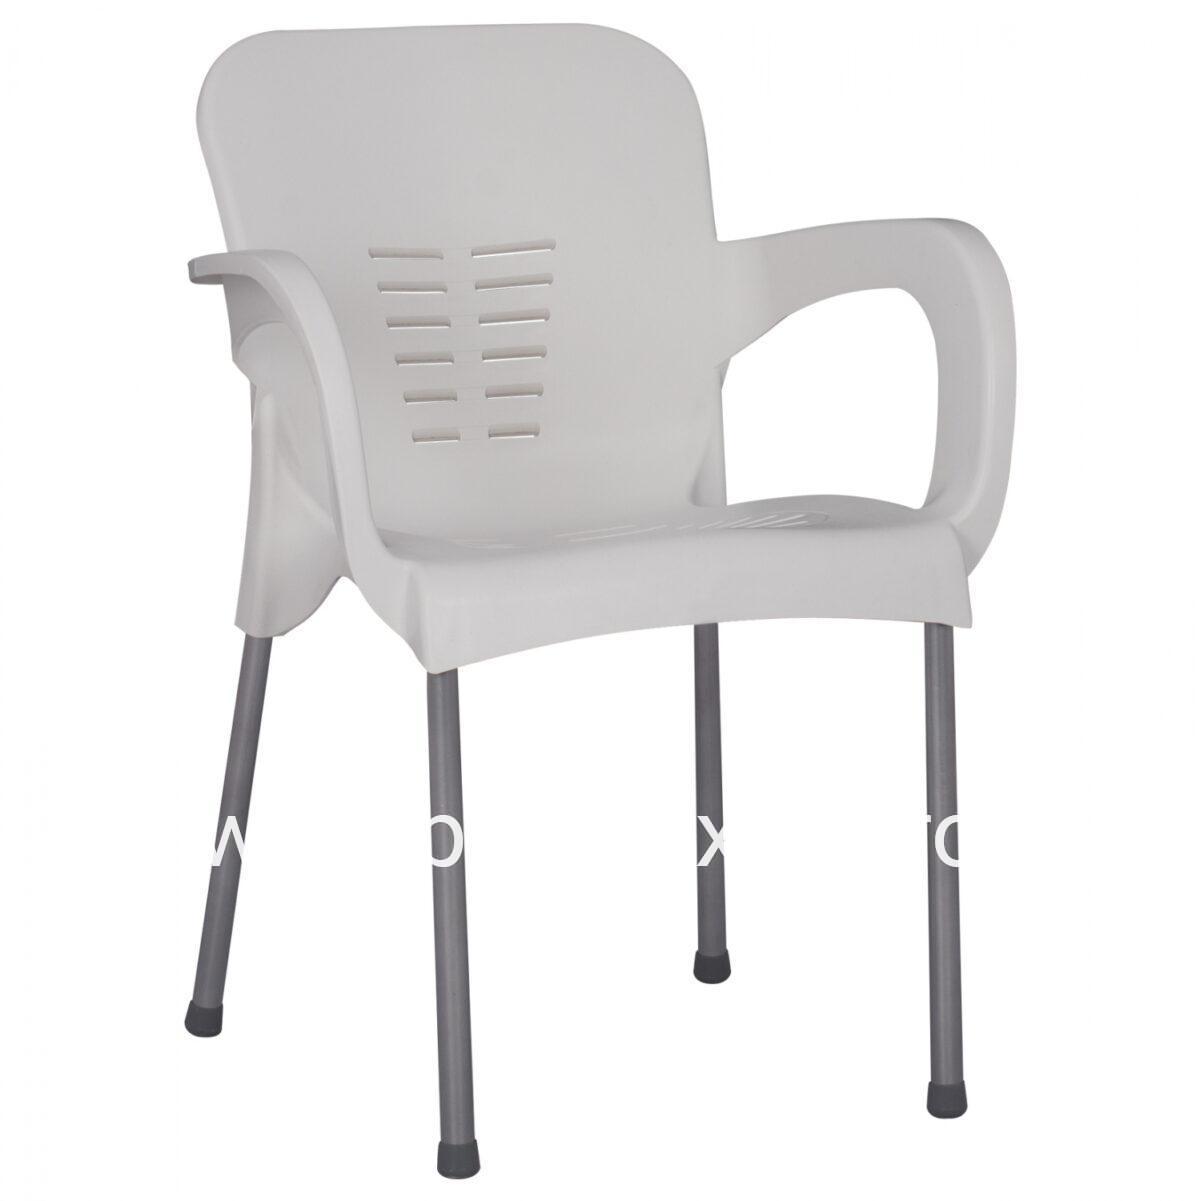 POLYPROPYLENE ARMCHAIR RECYCLED HM5592.11 WHITE COLOR 59.5x59x81 cm.